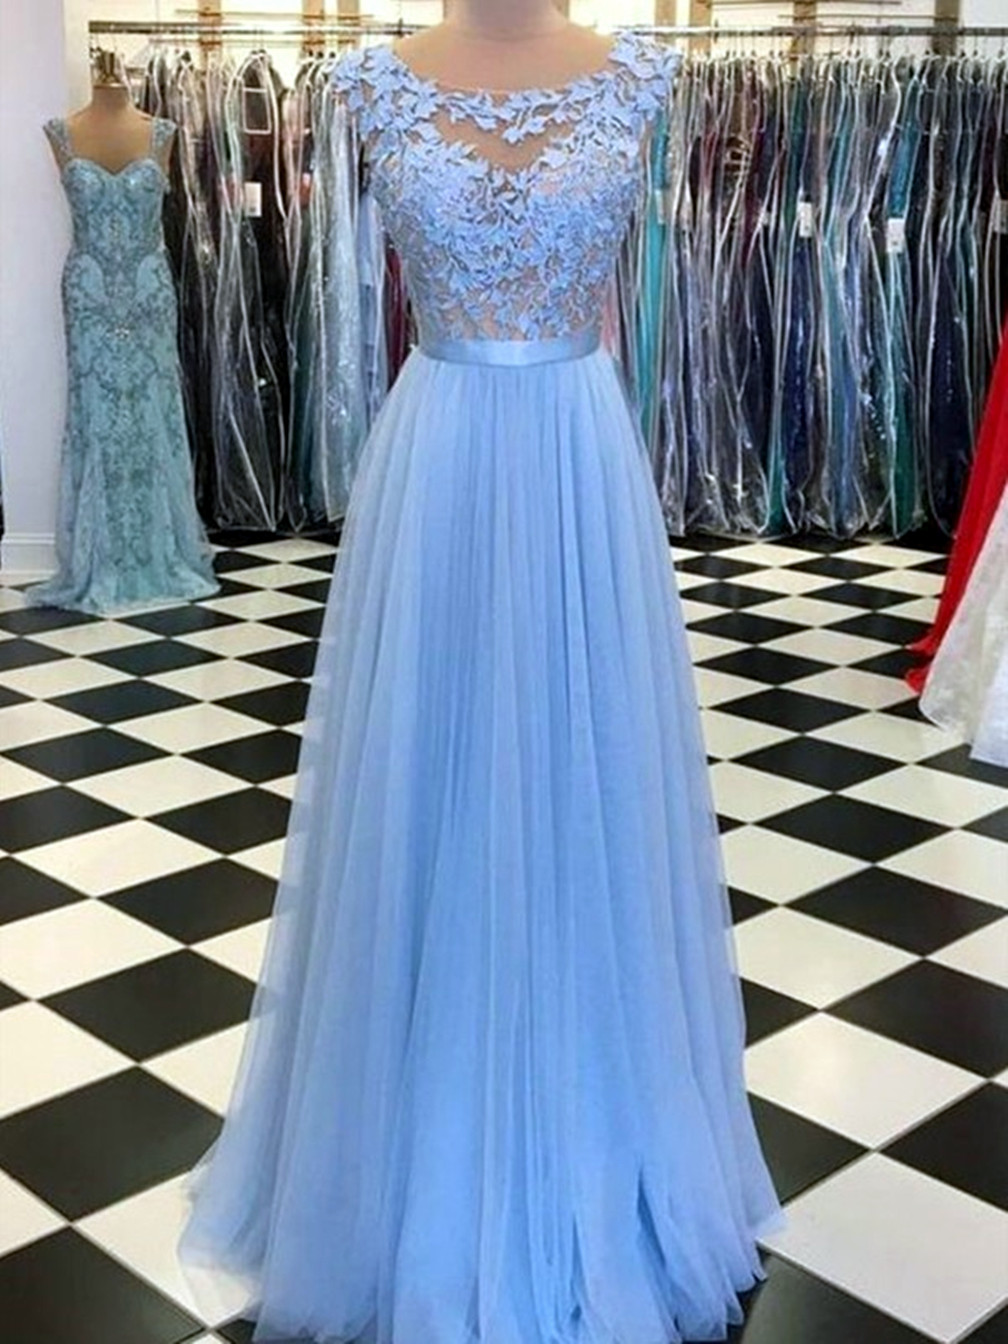 Women A-line/princess Lace Prom Dresses Long Appliques Evening Party Gowns Sleeveless Formal Dress Yp083